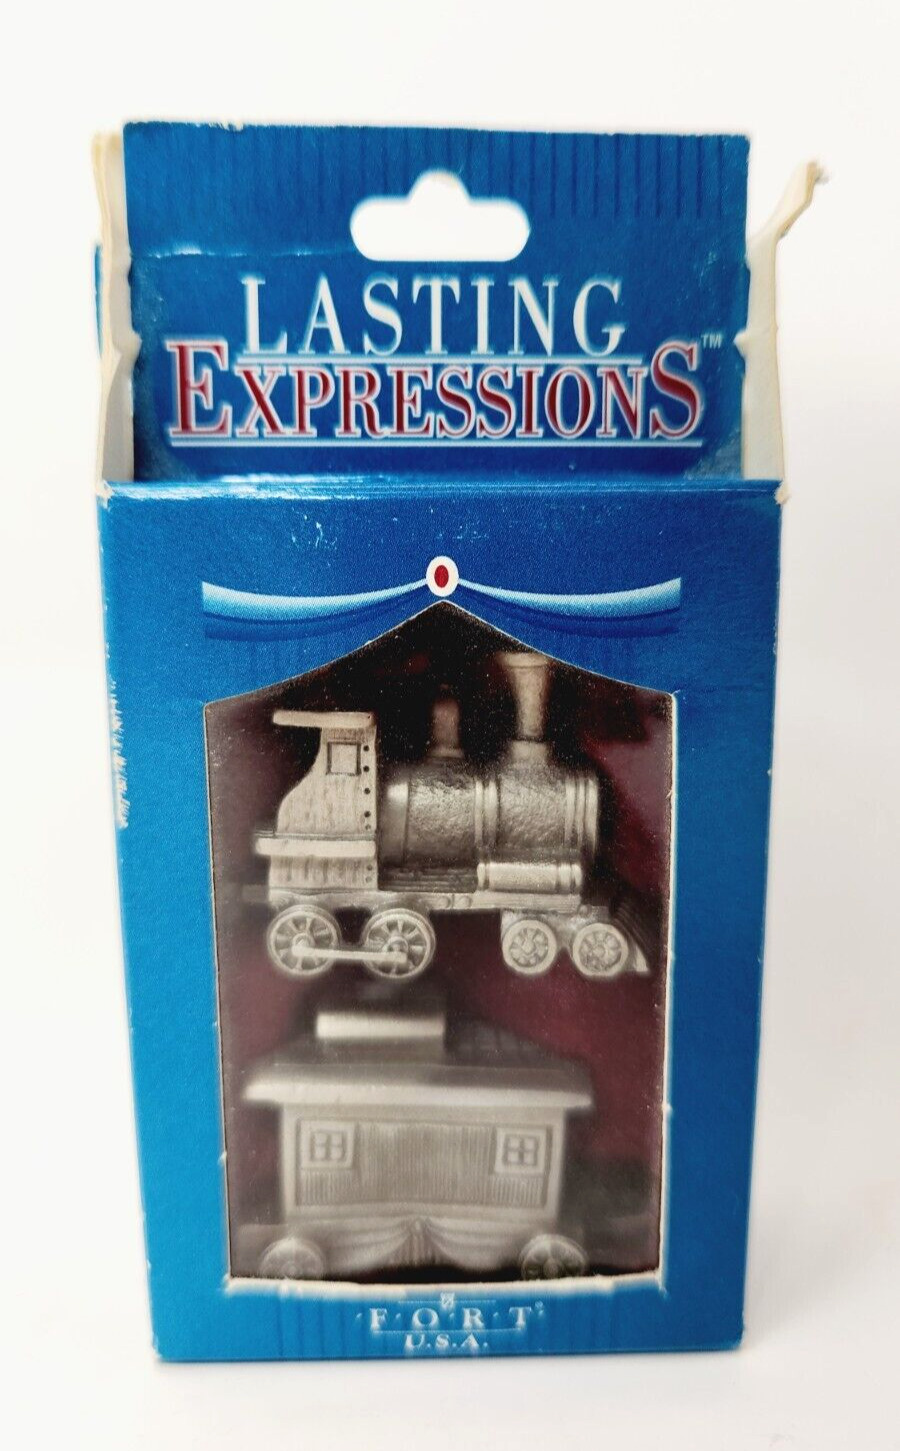 FORT PEWTER - LASTING EXPRESSIONS PEWTER TRAIN ENGINE & CABOOSE 67273 - NEW